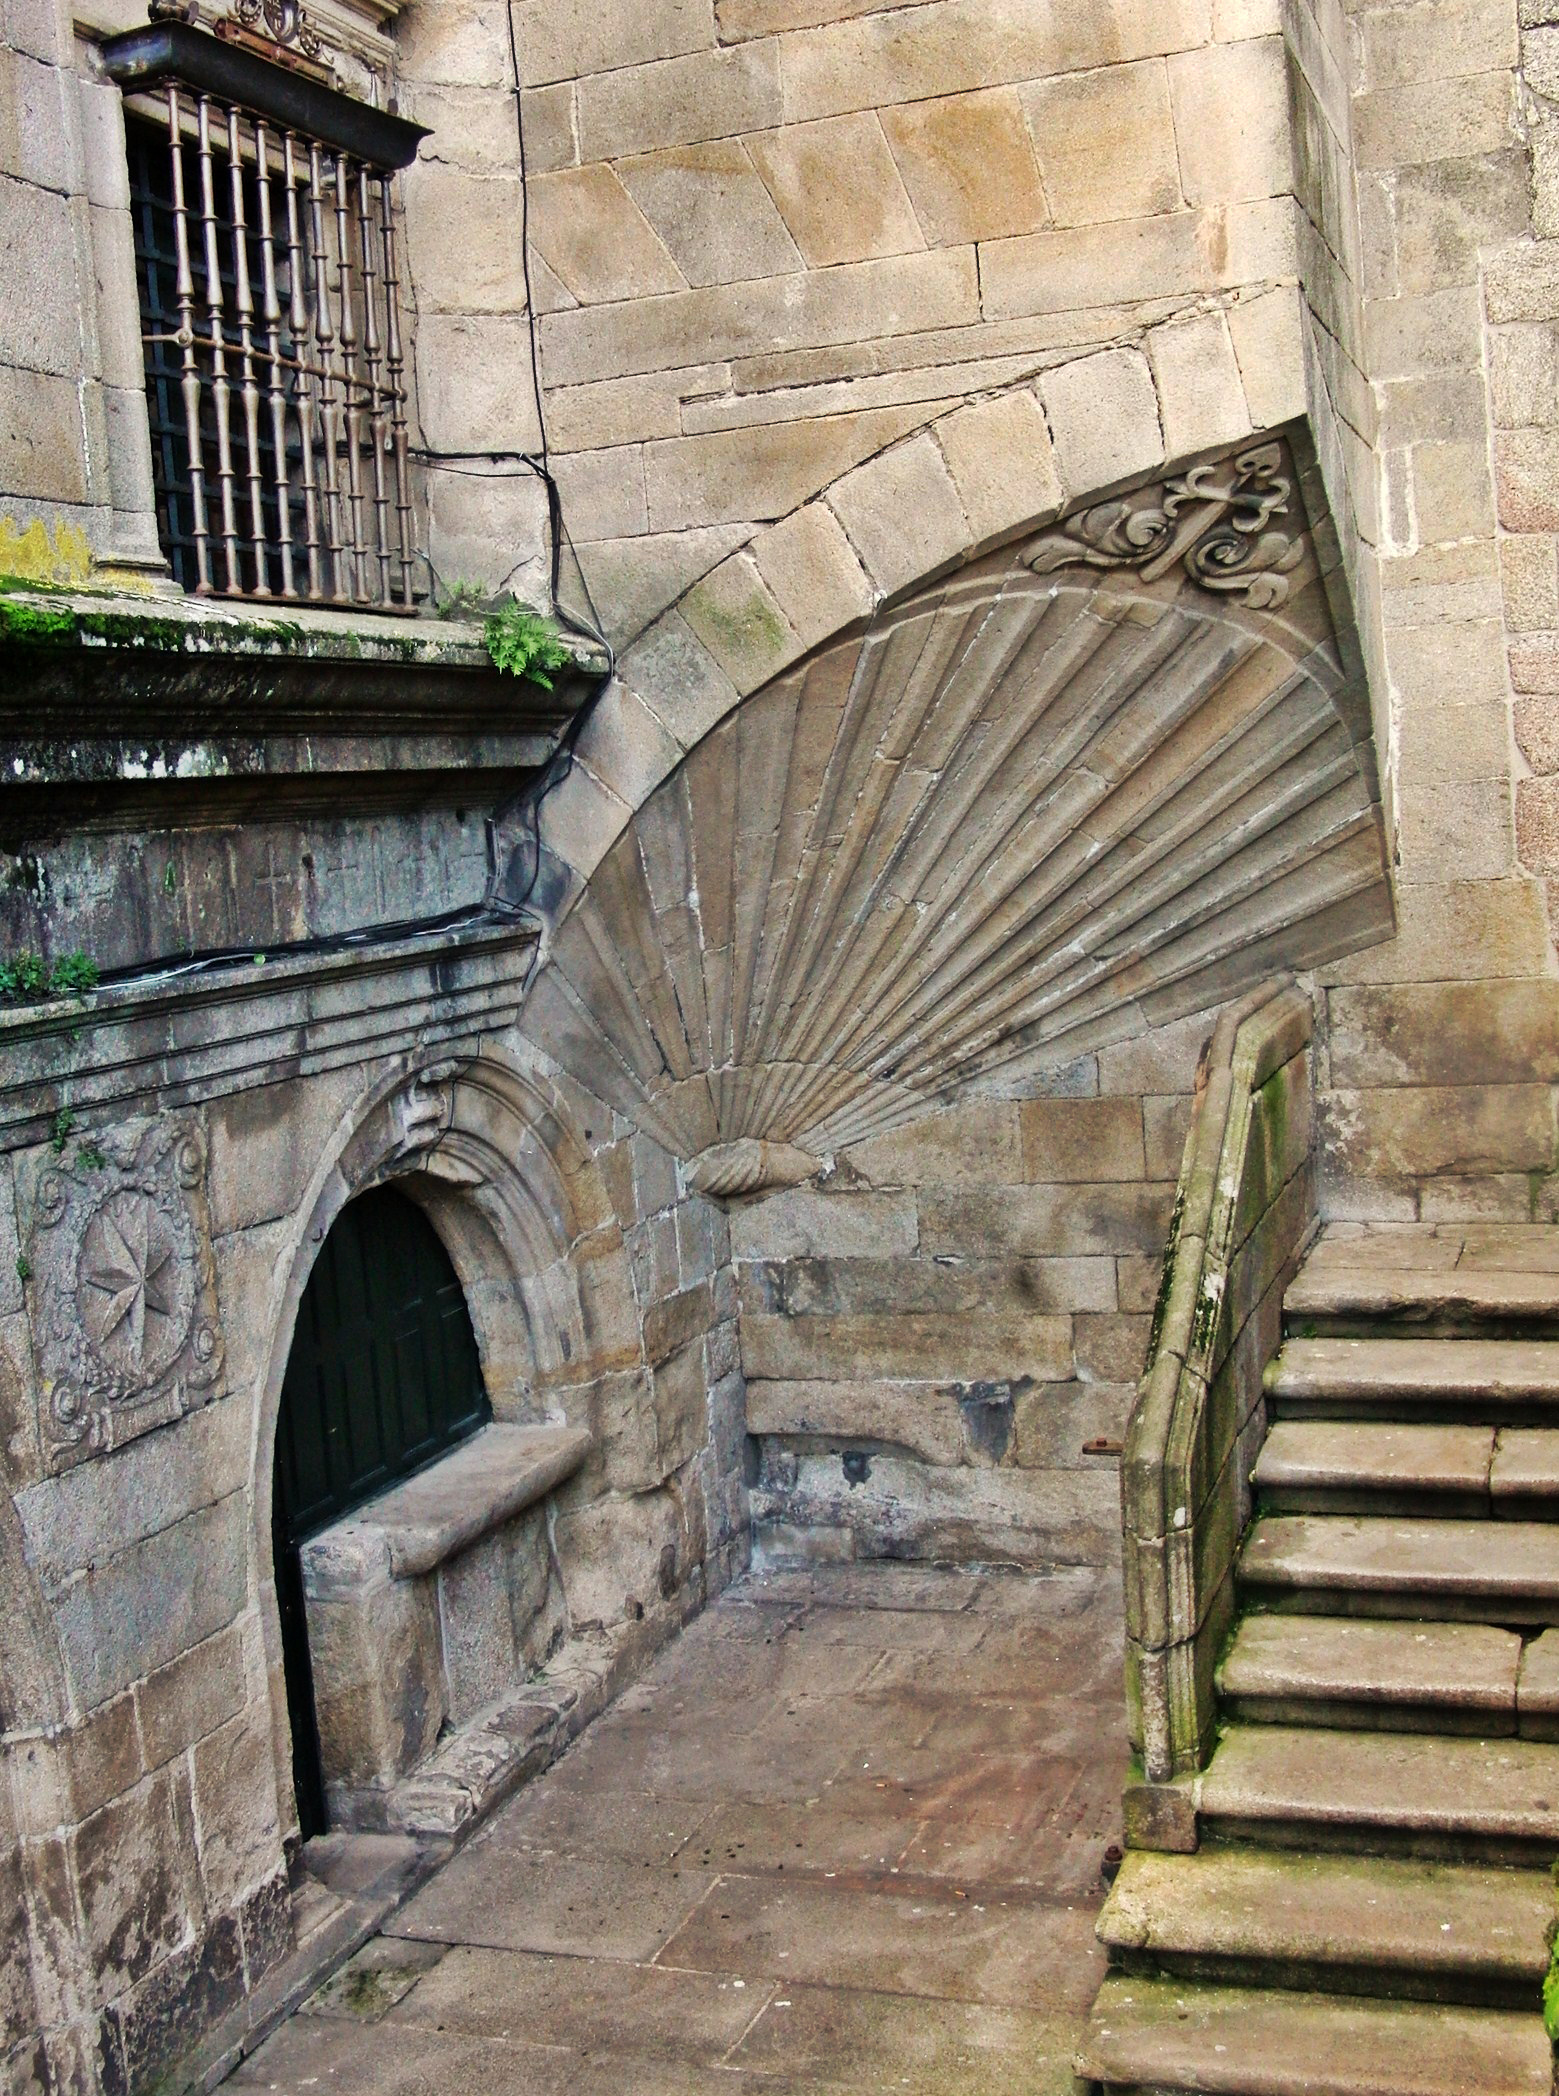 a doorway and steps inside a building in an old town